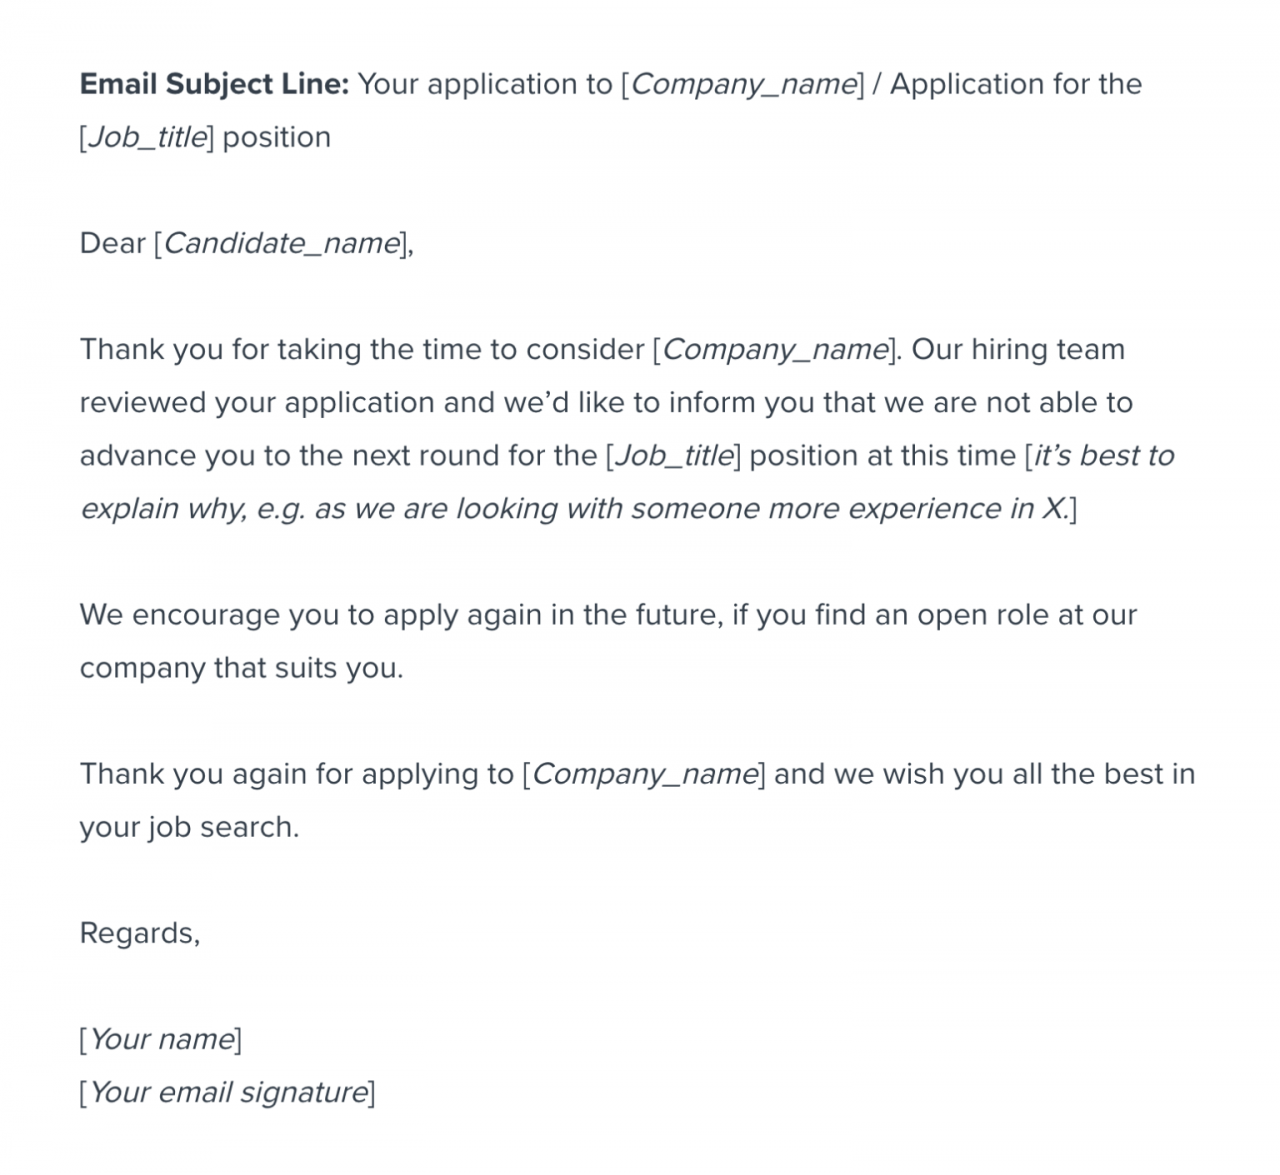 How to sign an email for a job application